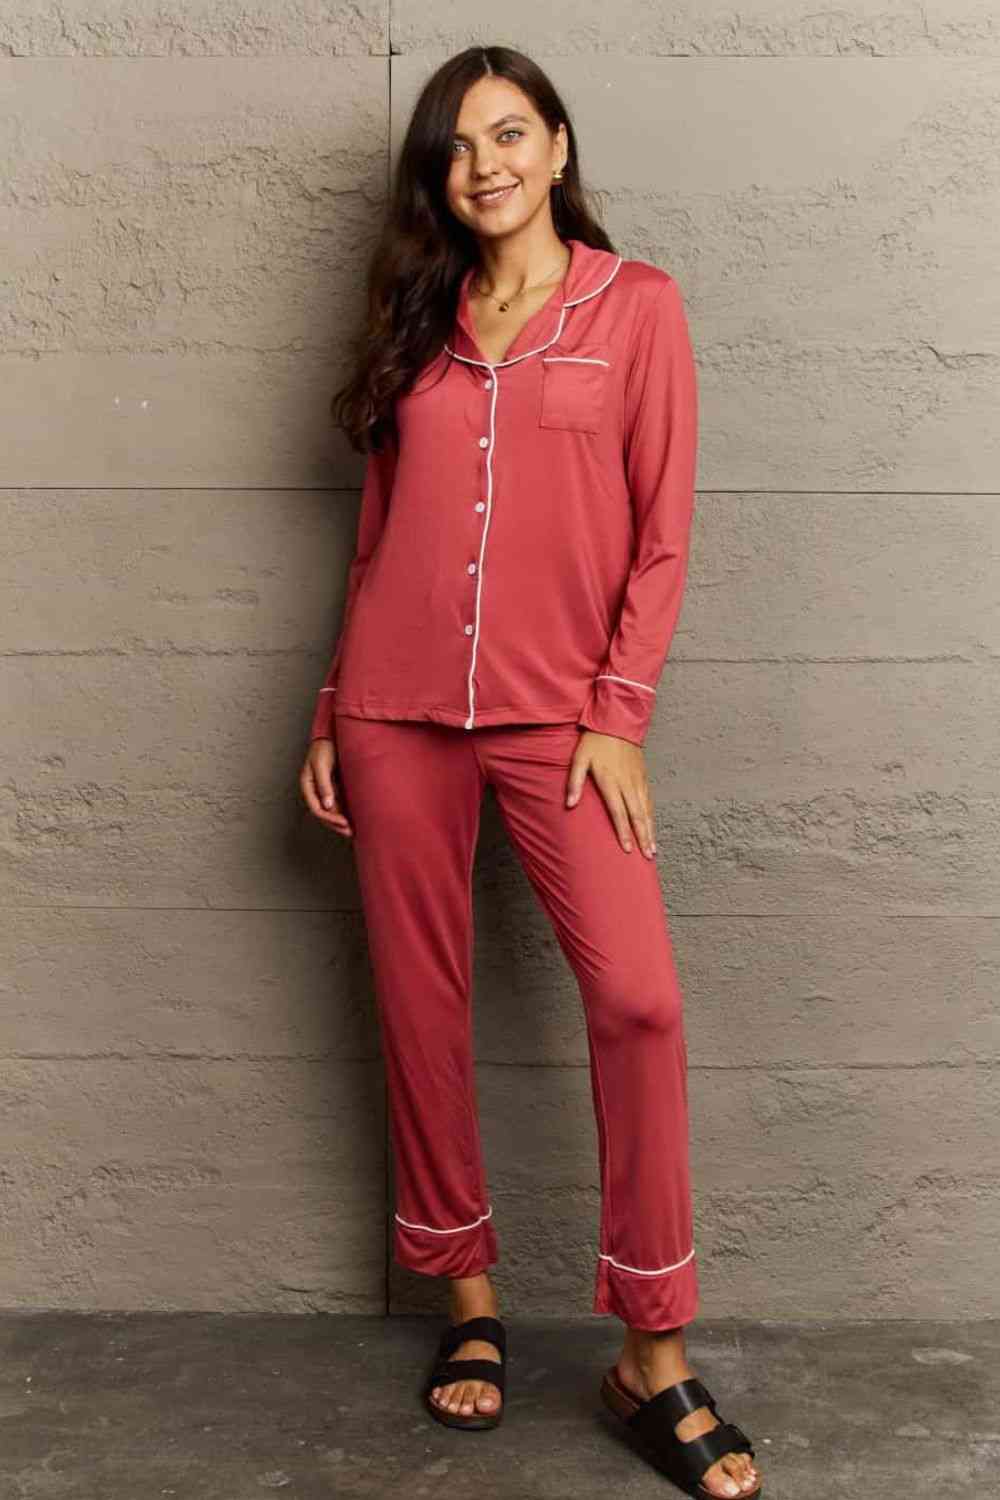 Ninexis Buttoned Collared Neck Top and Pants Pajama Set Deep Red